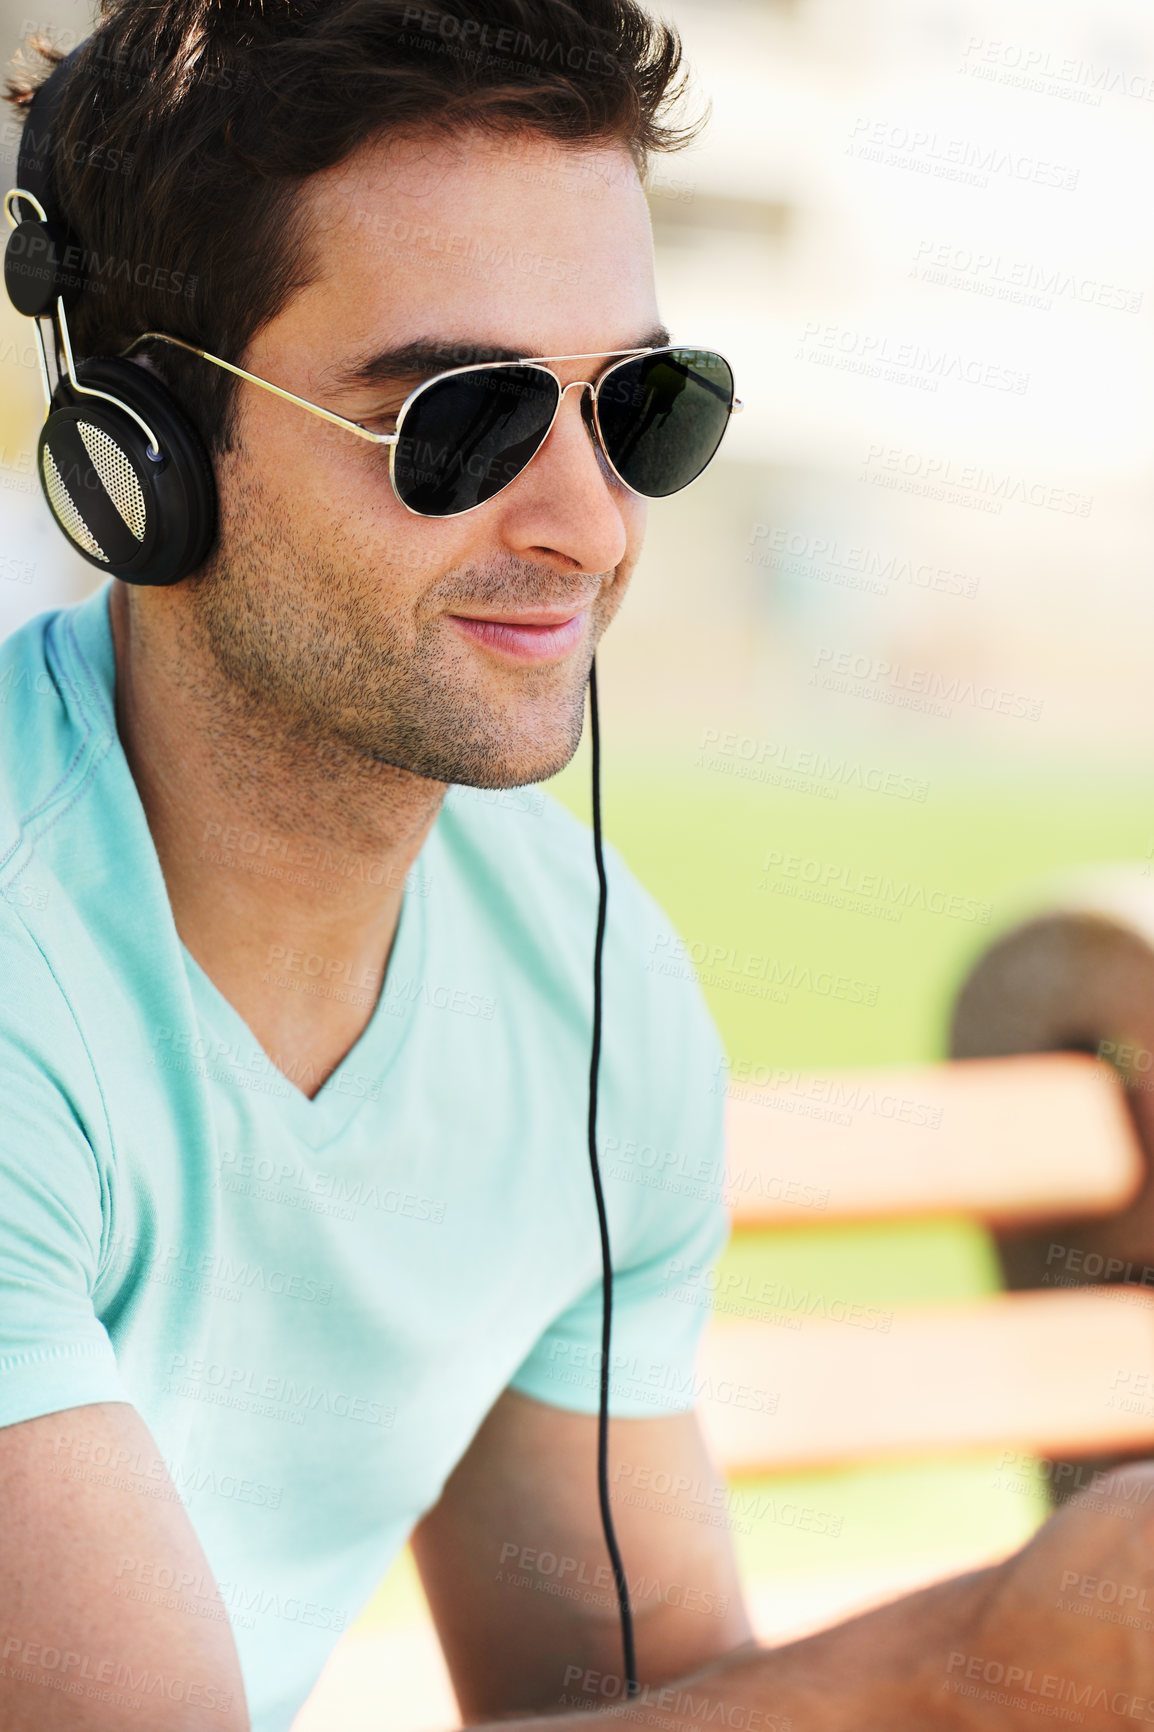 Buy stock photo A smiling young man wearing sunglasses sitting on a bench in a park and listening to music through his headphones